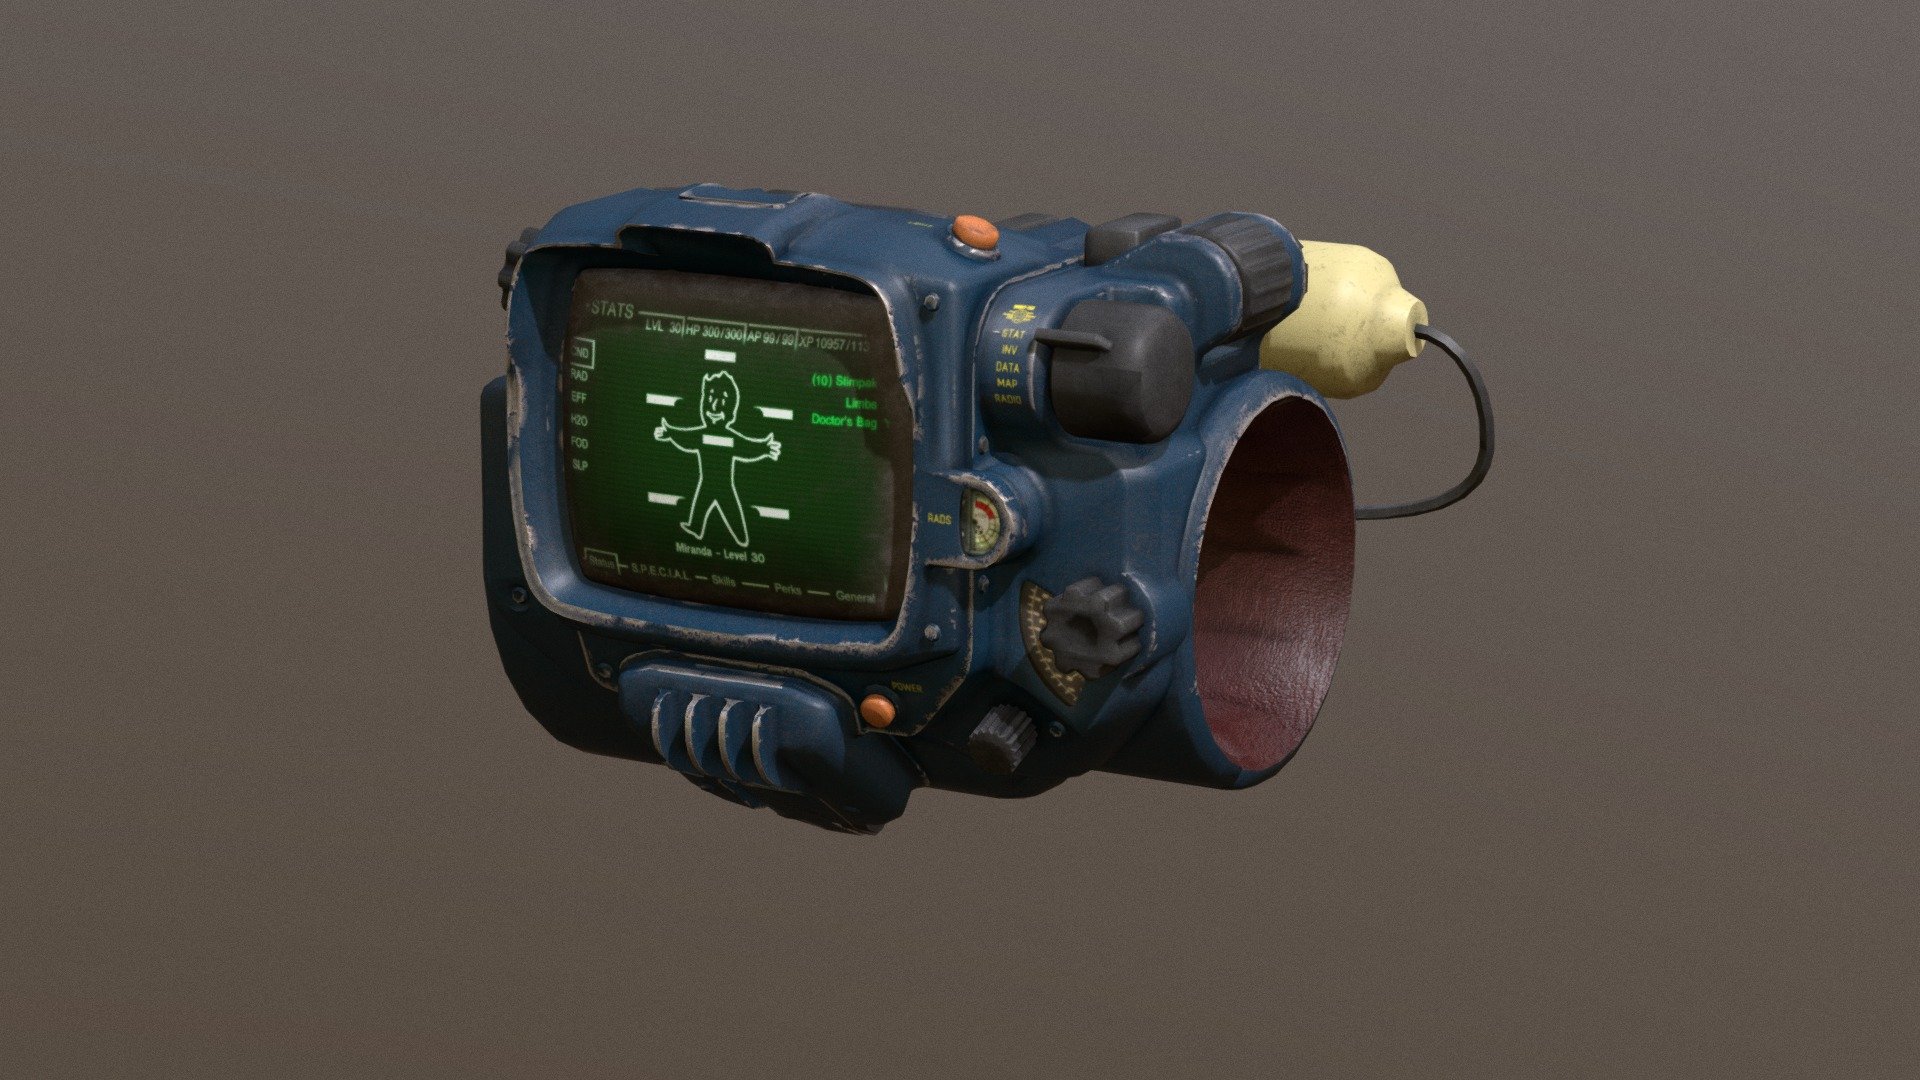 Pip-Boy 3000 Mark IV Vault-Tec corp.
Game ready model for unreal, unity engine. For scenes, videos, games.
4k PBR  textures in substance painter. Albedo, Metalic + rougness, Normal map. 
gizmos ready. You need somting ? PM me =) - Pip-Boy 3000 Mark IV Vault-Tec corp 3d model